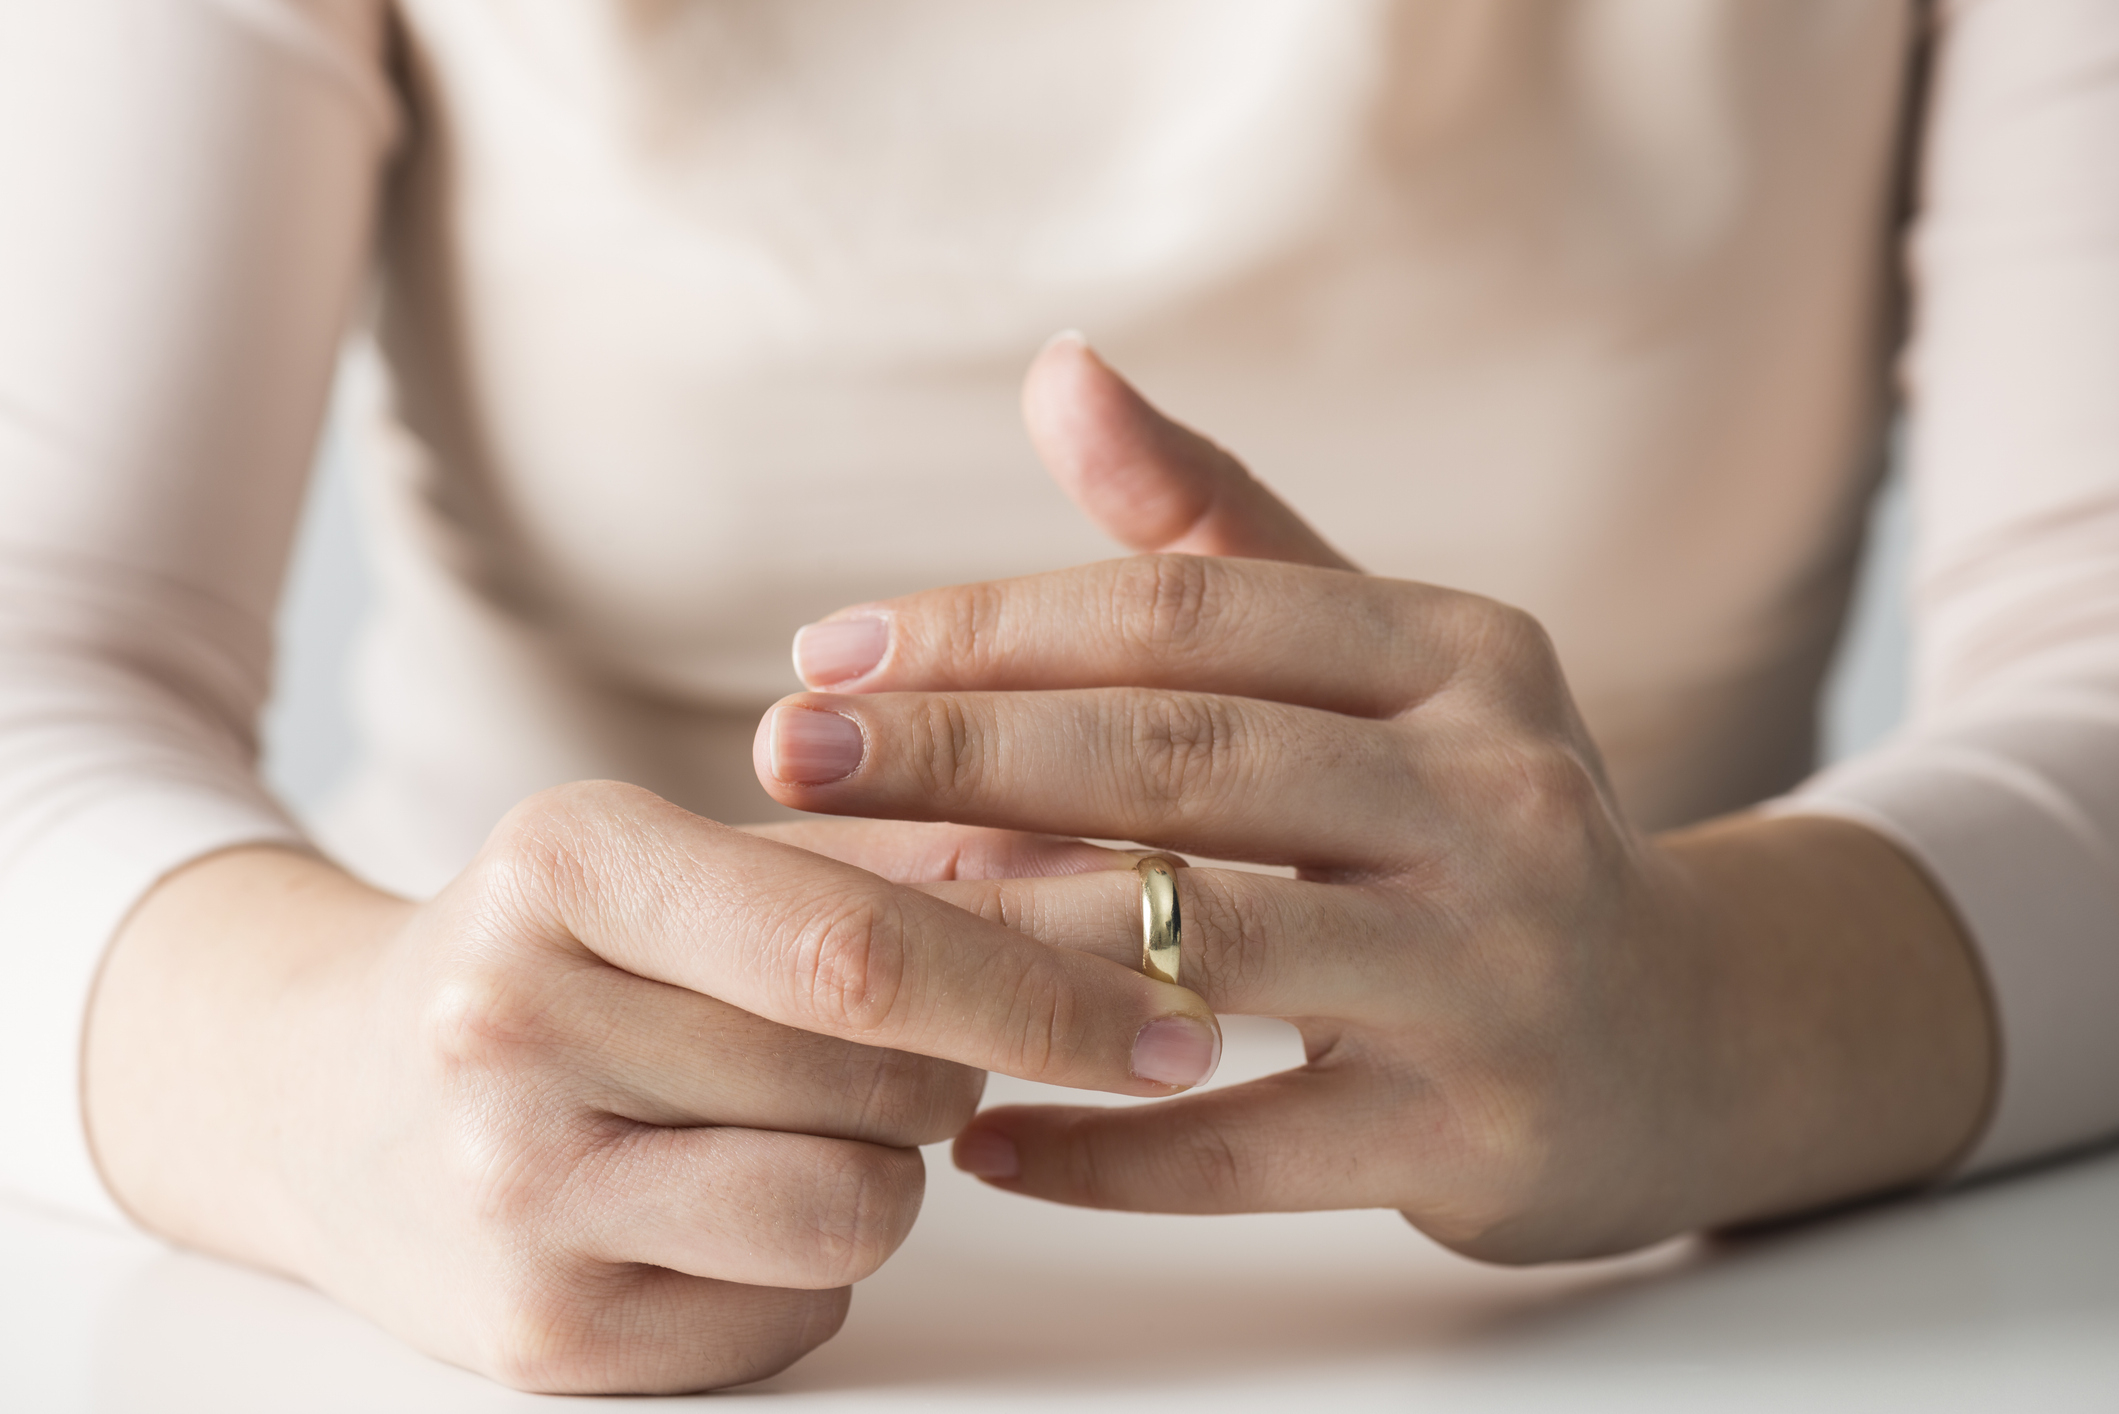 Person removing a wedding ring from ring finger